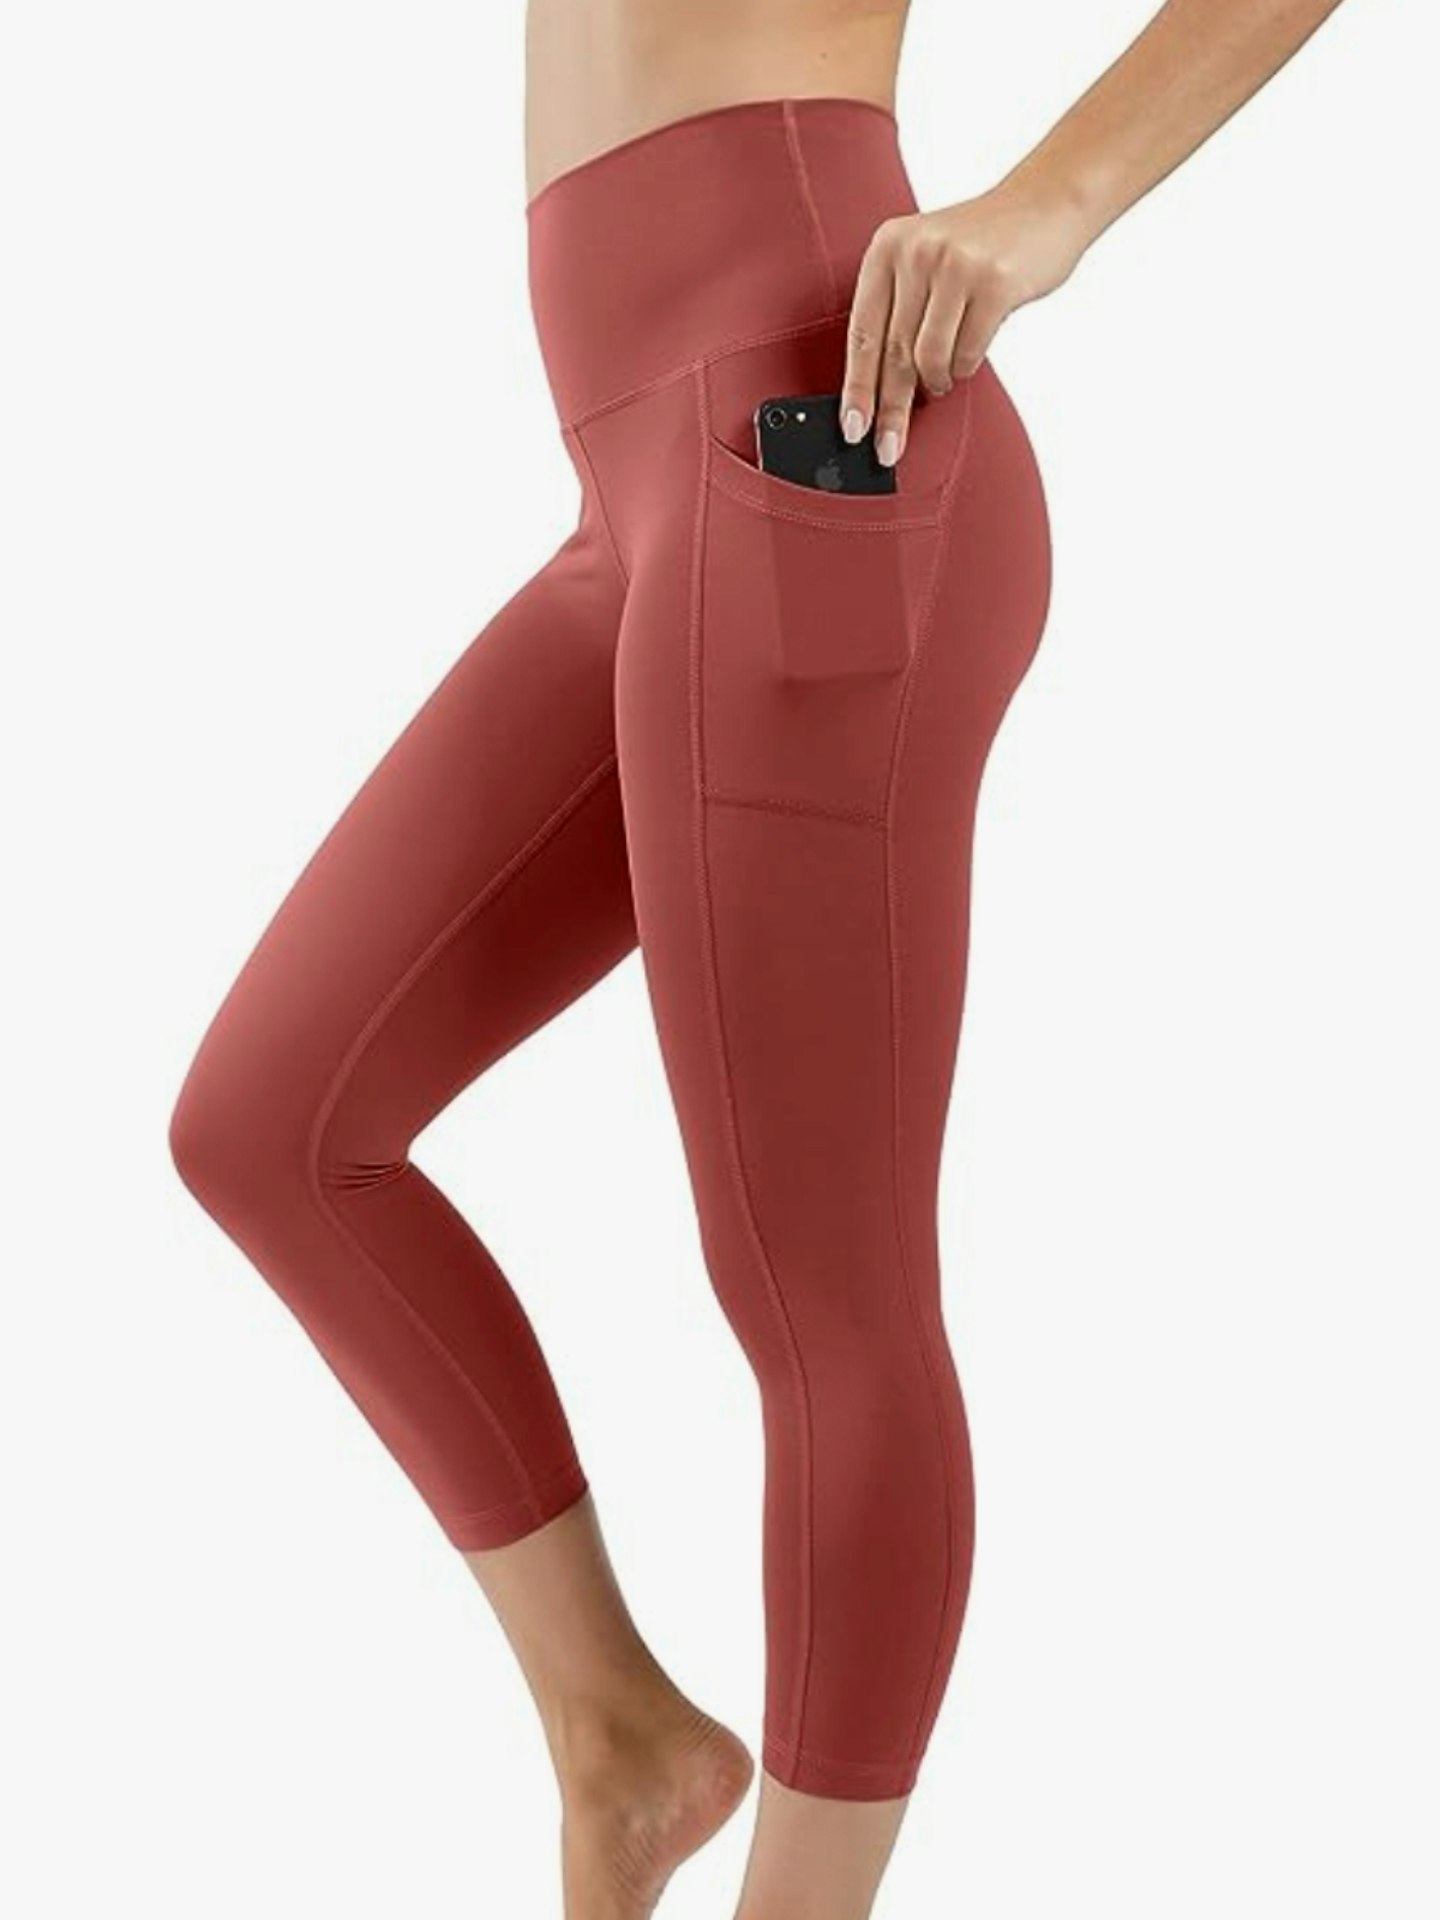 What are the best brands of running tights or pants for women? - Quora